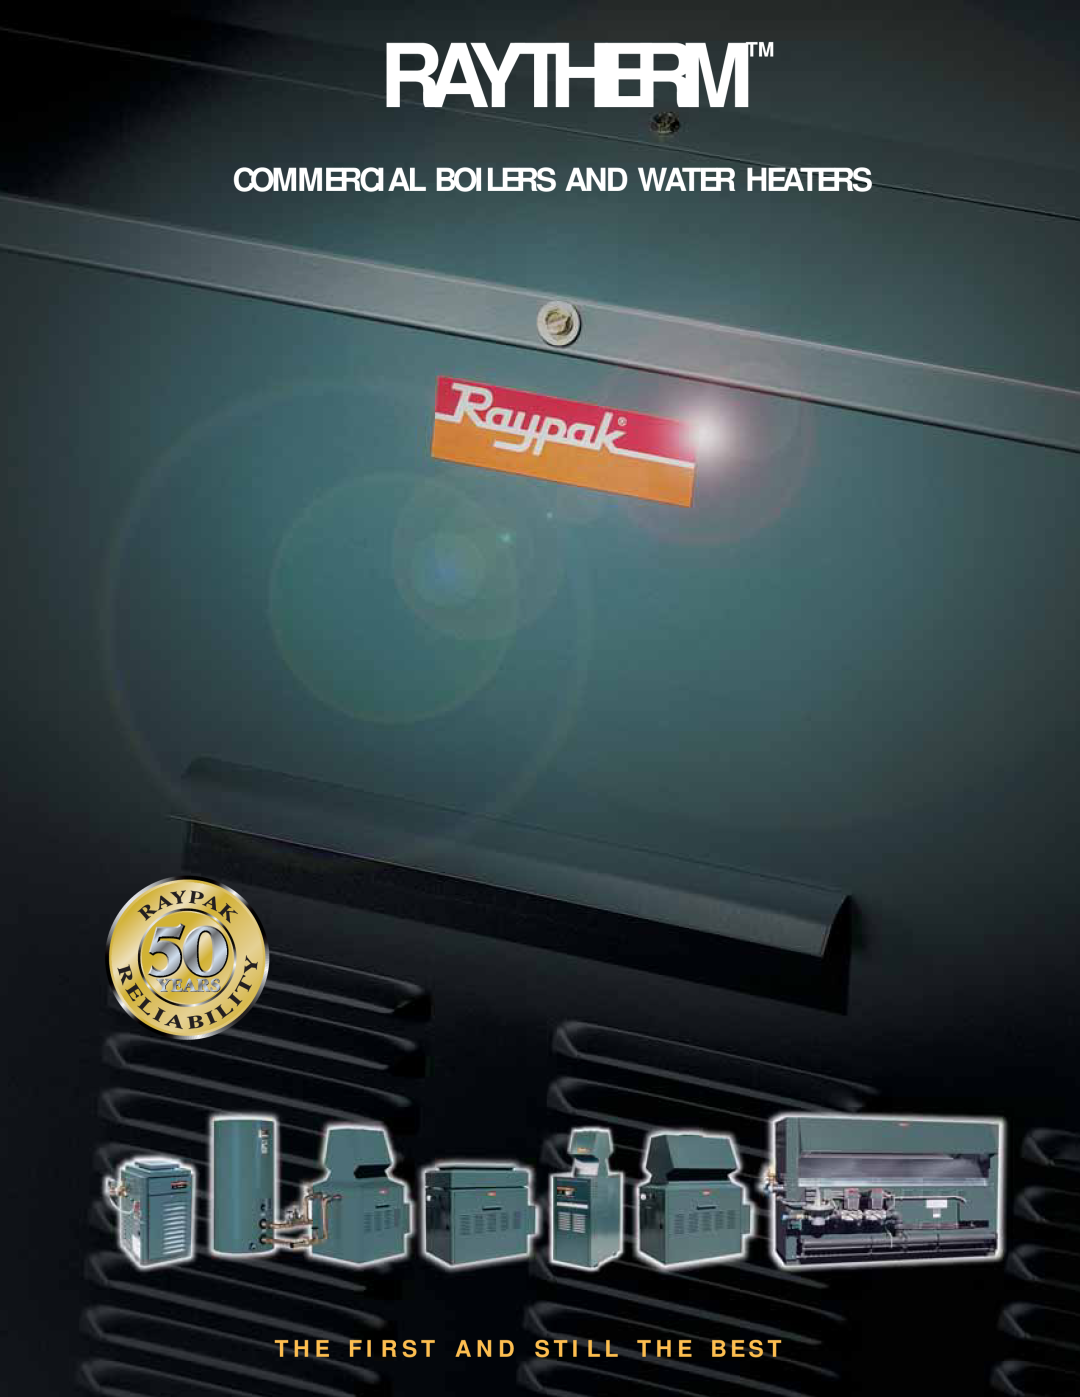 Raypak manual Commercial Boilers And Water Heaters, Raytherm, T H E F I R S T A N D S T I L L T H E B E S T 